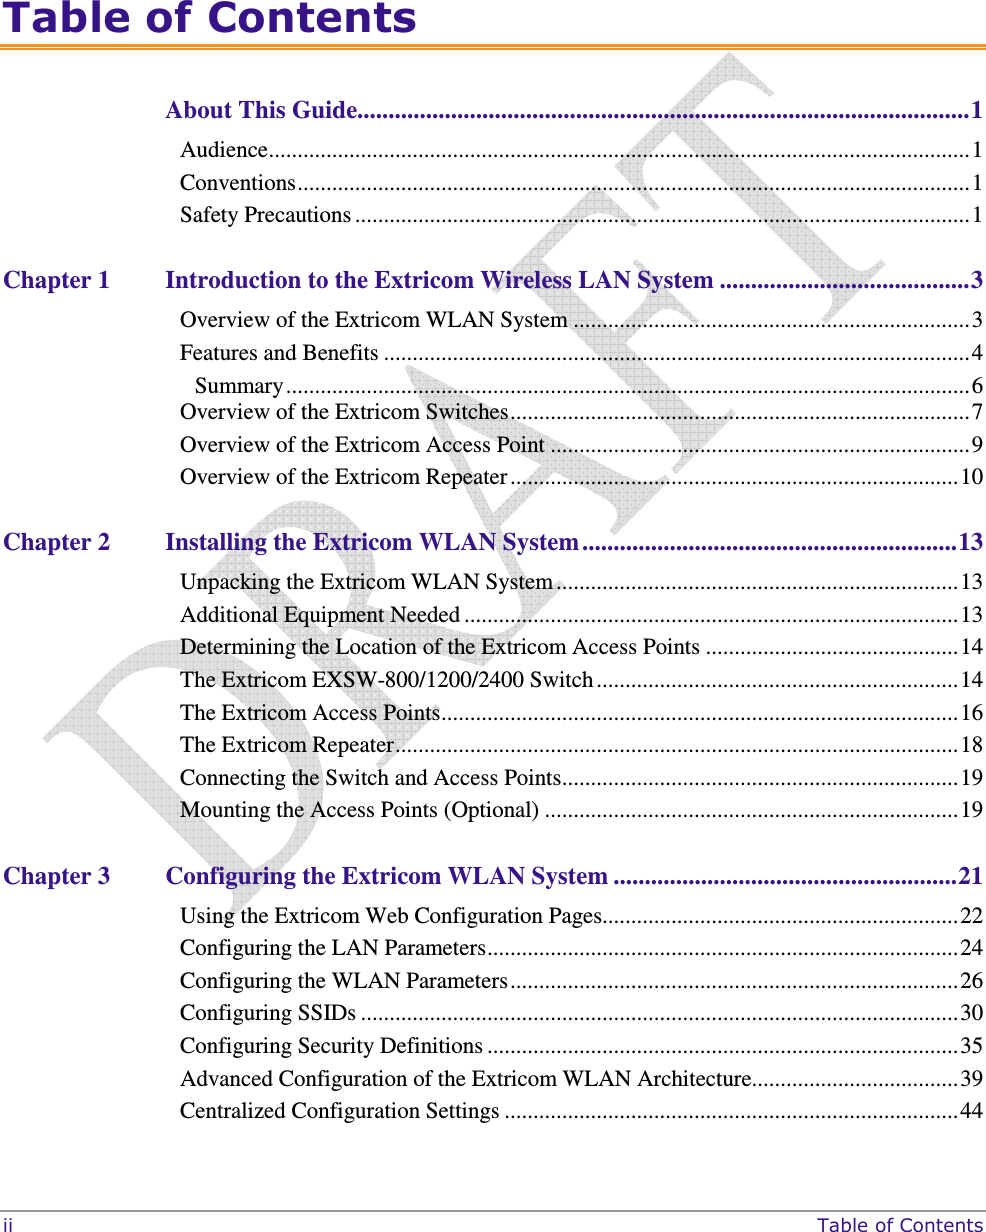  ii     Table of Contents  Table of Contents About This Guide..................................................................................................1 Audience..........................................................................................................................1 Conventions.....................................................................................................................1 Safety Precautions ...........................................................................................................1 Chapter 1 Introduction to the Extricom Wireless LAN System ........................................3 Overview of the Extricom WLAN System .....................................................................3 Features and Benefits ......................................................................................................4 Summary.......................................................................................................................6 Overview of the Extricom Switches................................................................................7 Overview of the Extricom Access Point .........................................................................9 Overview of the Extricom Repeater..............................................................................10 Chapter 2 Installing the Extricom WLAN System ............................................................13 Unpacking the Extricom WLAN System ......................................................................13 Additional Equipment Needed ......................................................................................13 Determining the Location of the Extricom Access Points ............................................14 The Extricom EXSW-800/1200/2400 Switch ...............................................................14 The Extricom Access Points..........................................................................................16 The Extricom Repeater..................................................................................................18 Connecting the Switch and Access Points.....................................................................19 Mounting the Access Points (Optional) ........................................................................19 Chapter 3 Configuring the Extricom WLAN System .......................................................21 Using the Extricom Web Configuration Pages..............................................................22 Configuring the LAN Parameters..................................................................................24 Configuring the WLAN Parameters..............................................................................26 Configuring SSIDs ........................................................................................................30 Configuring Security Definitions ..................................................................................35 Advanced Configuration of the Extricom WLAN Architecture....................................39 Centralized Configuration Settings ...............................................................................44 